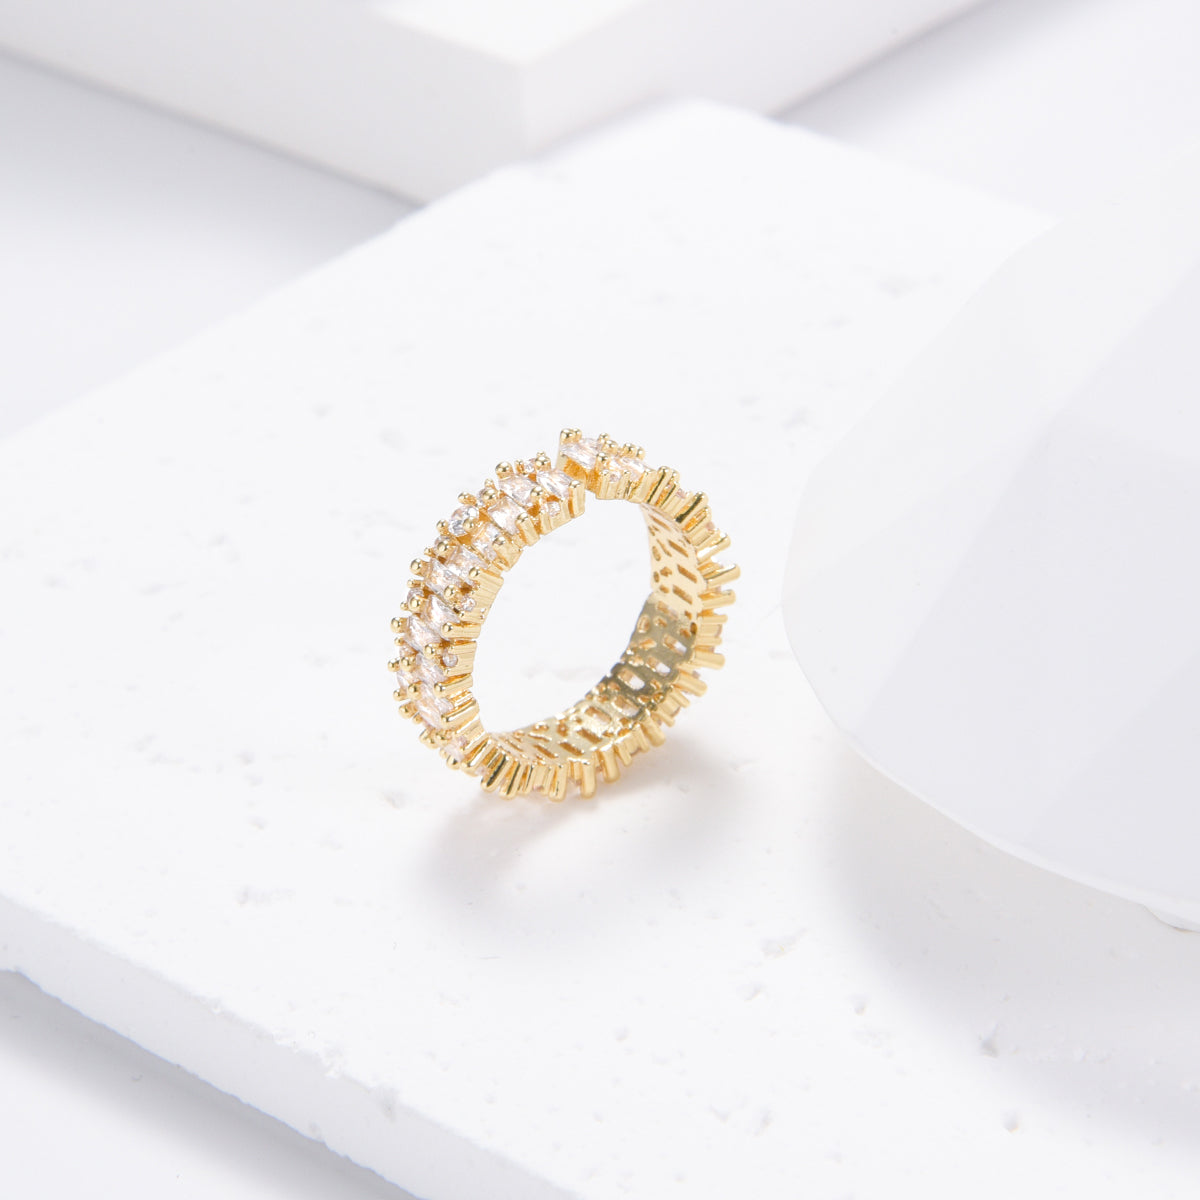 Golden ring with stunning crystal design